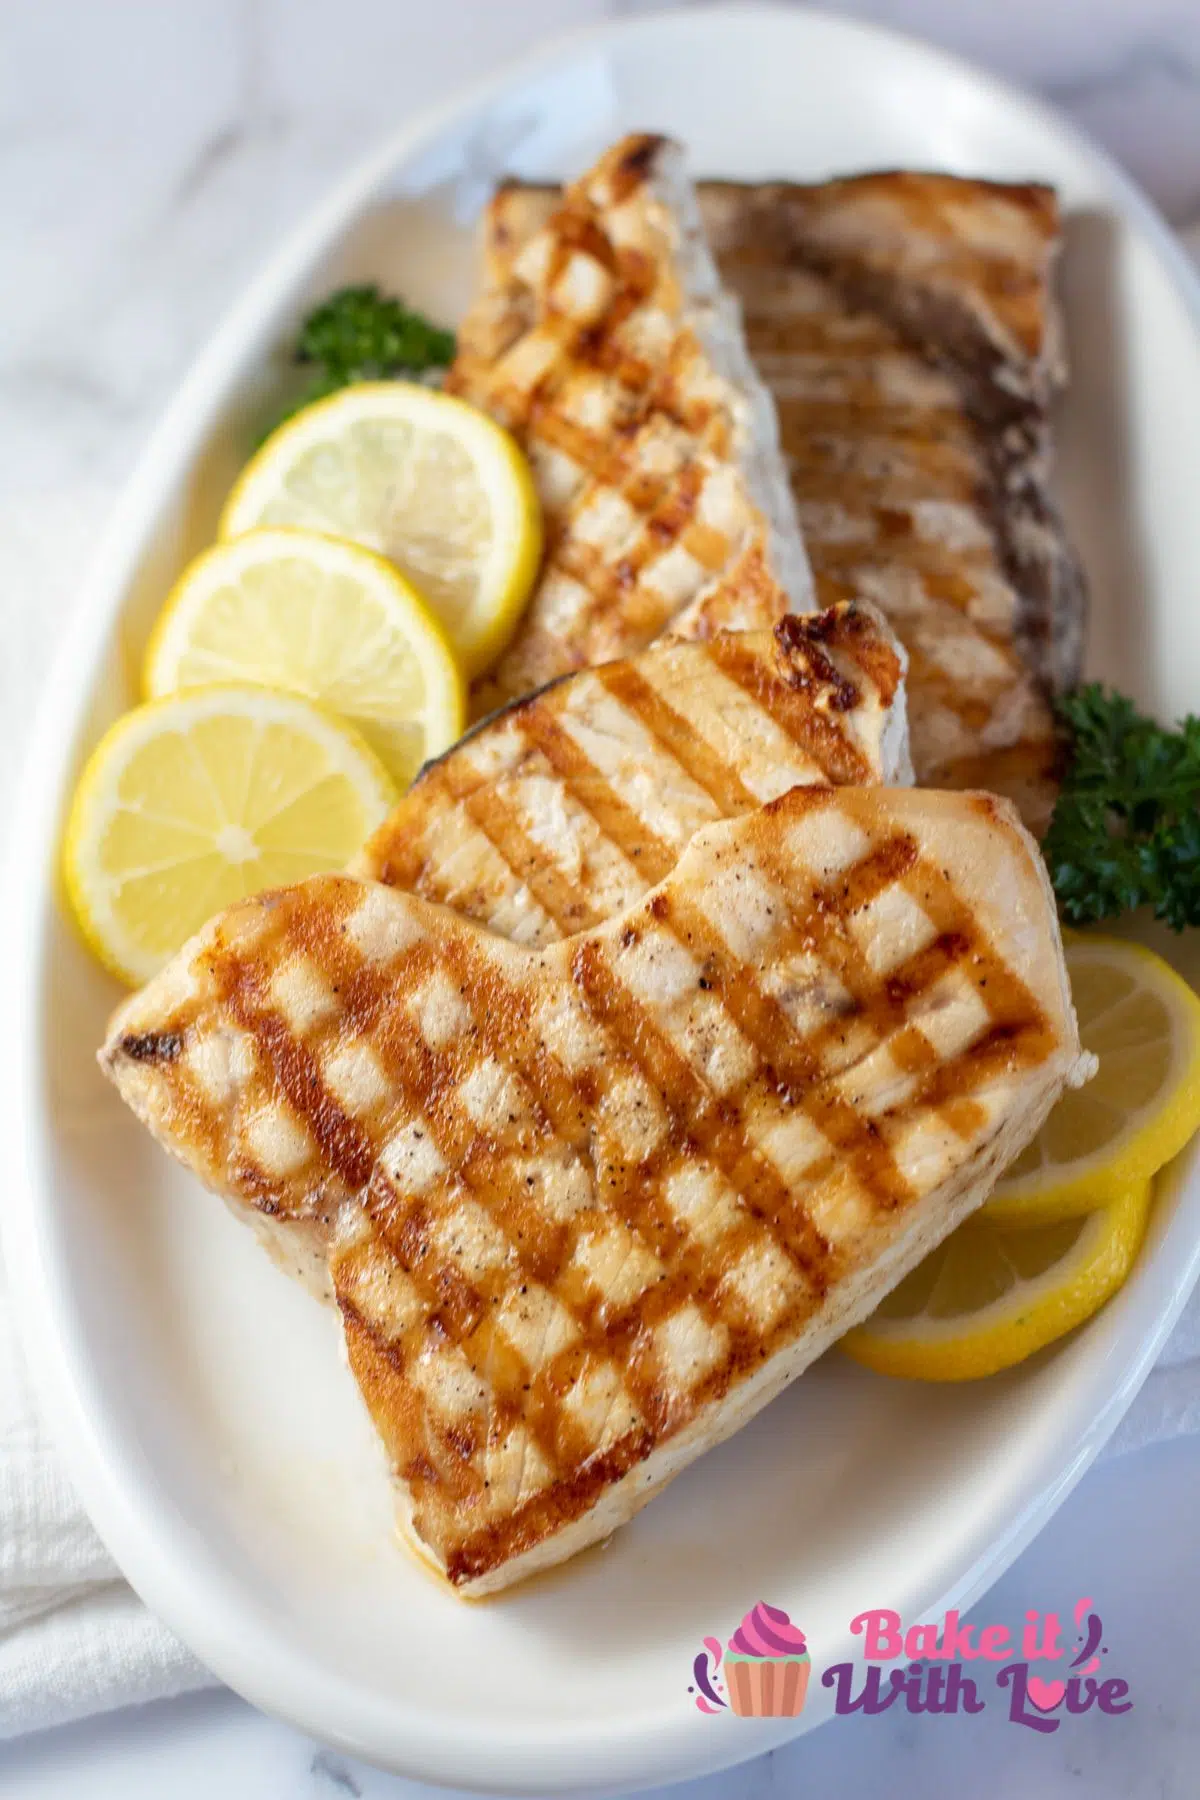 Tall image of grilled swordfish on a white plate with fresh lemon slices.